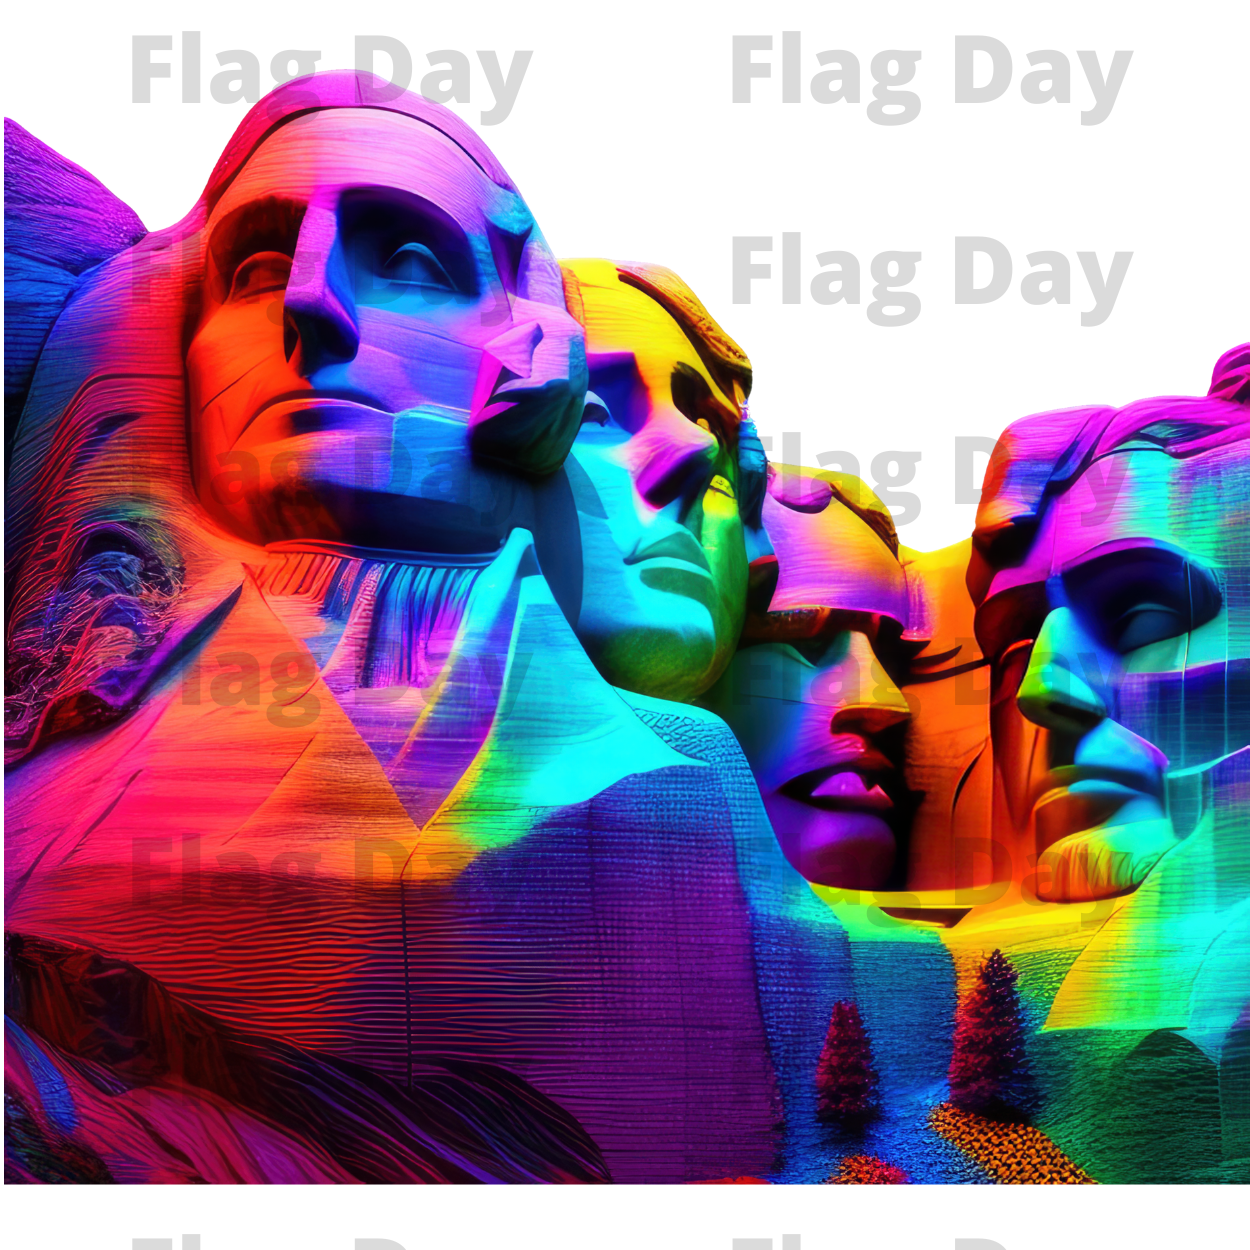 Mount Rushmore Holographic